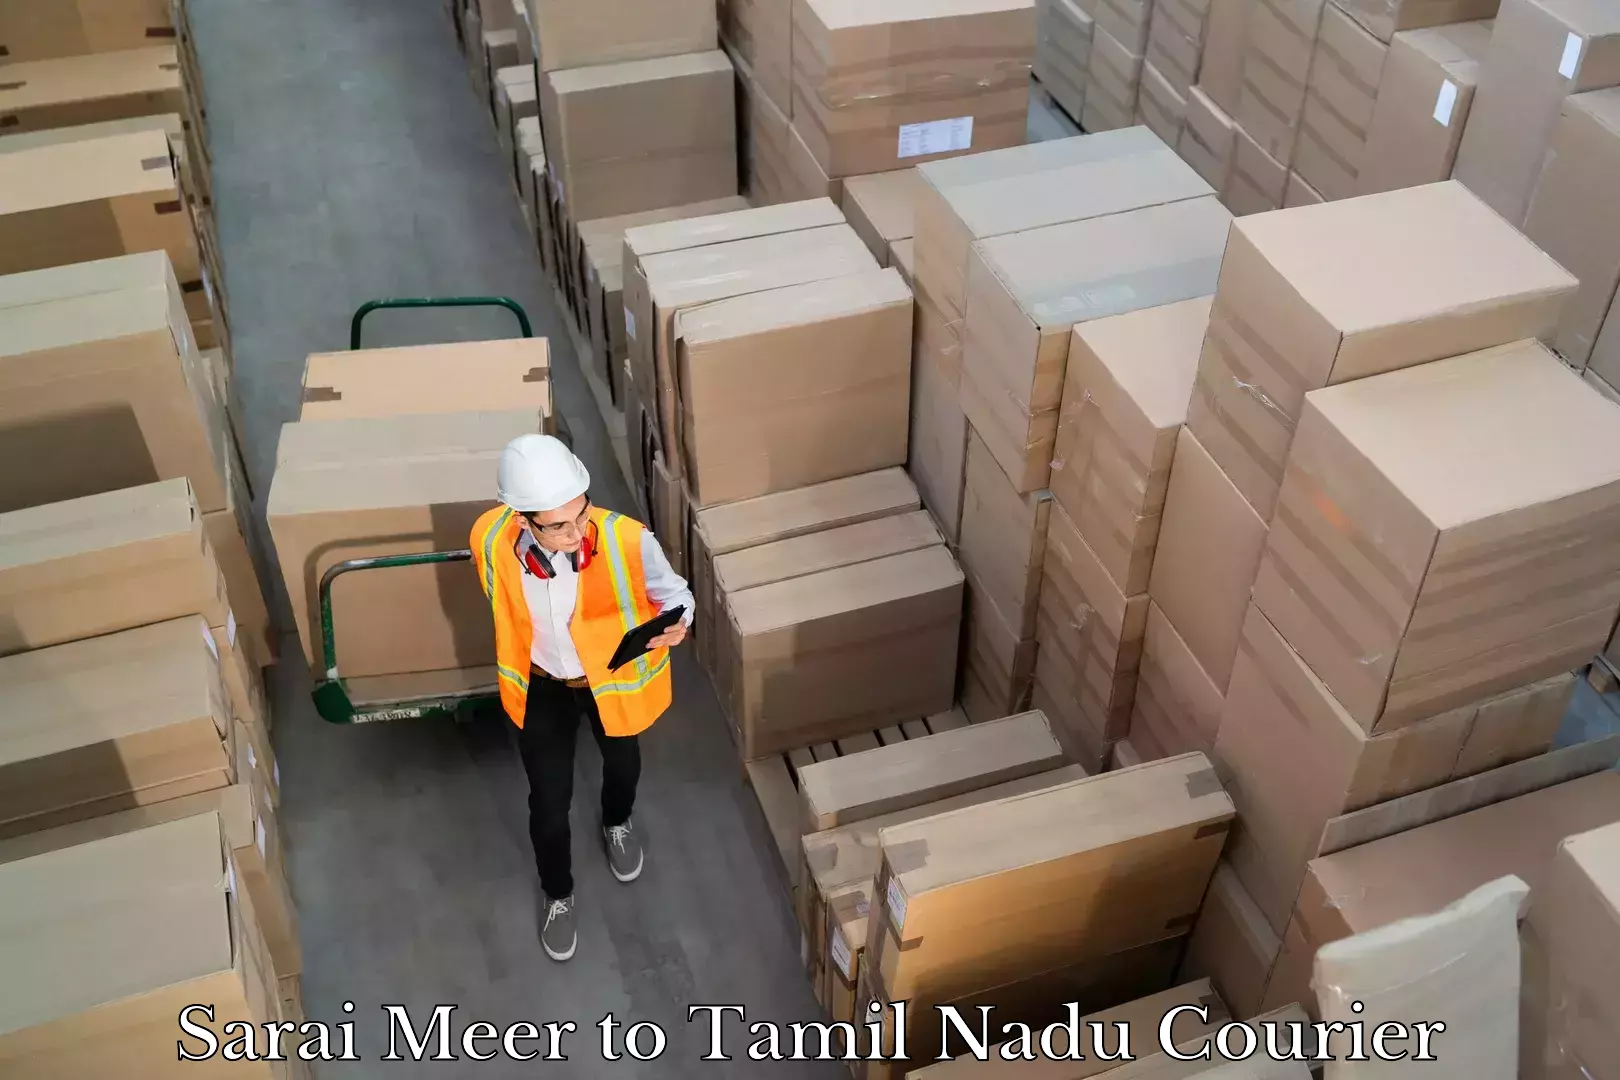 24/7 shipping services Sarai Meer to Tamil Nadu